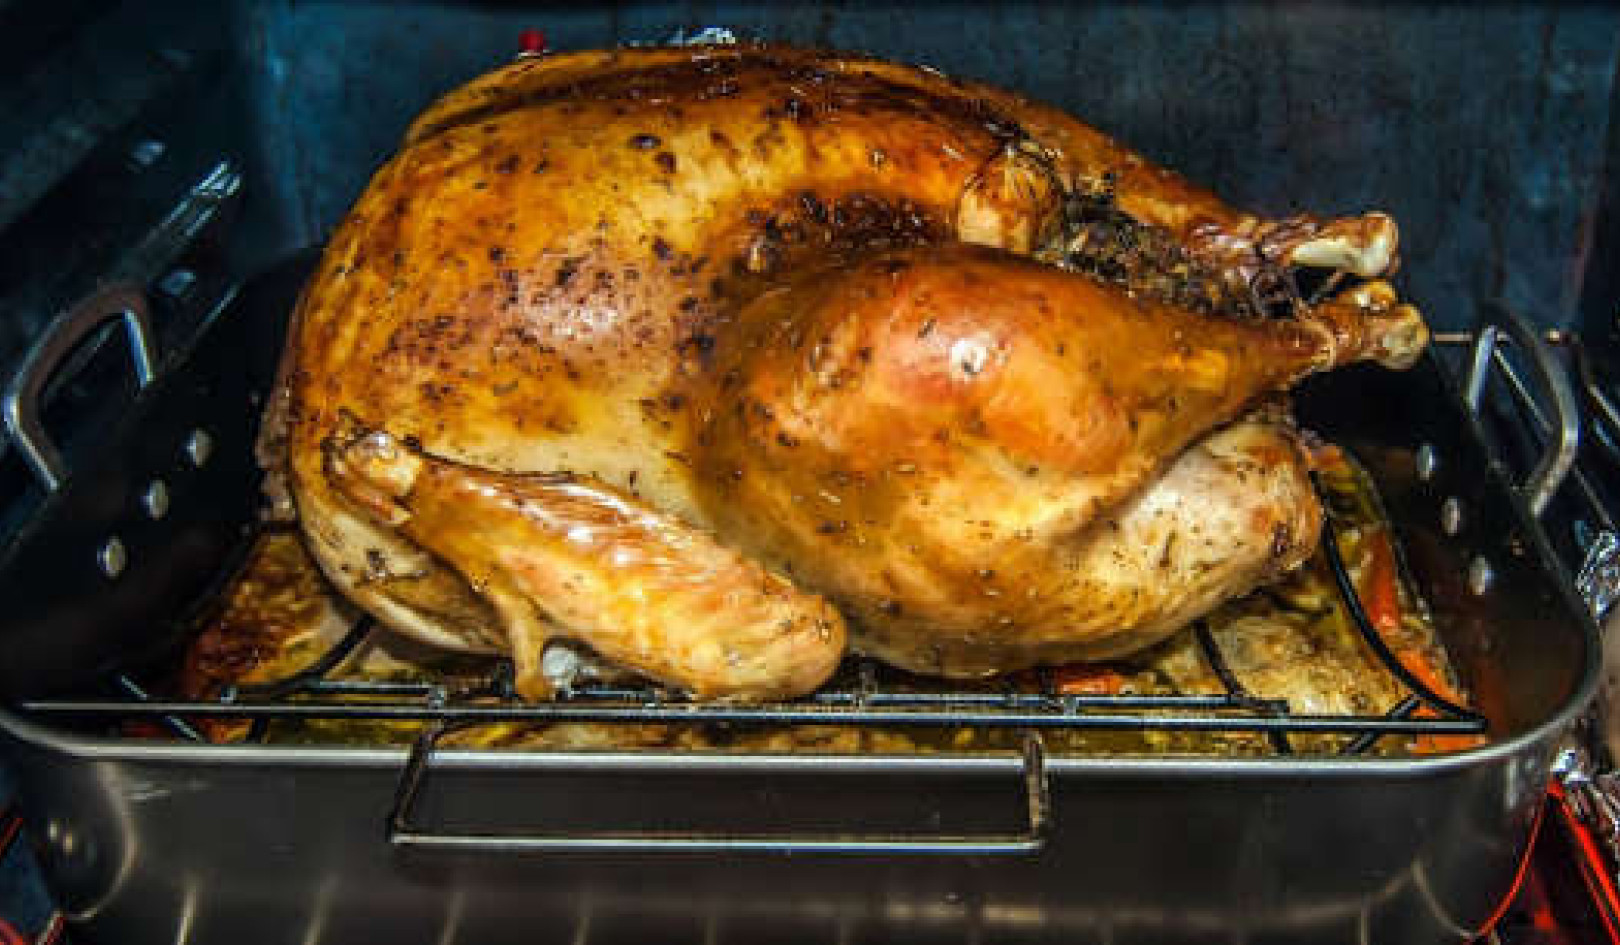 Should You Stop Washing Your Turkey and Other Poultry?